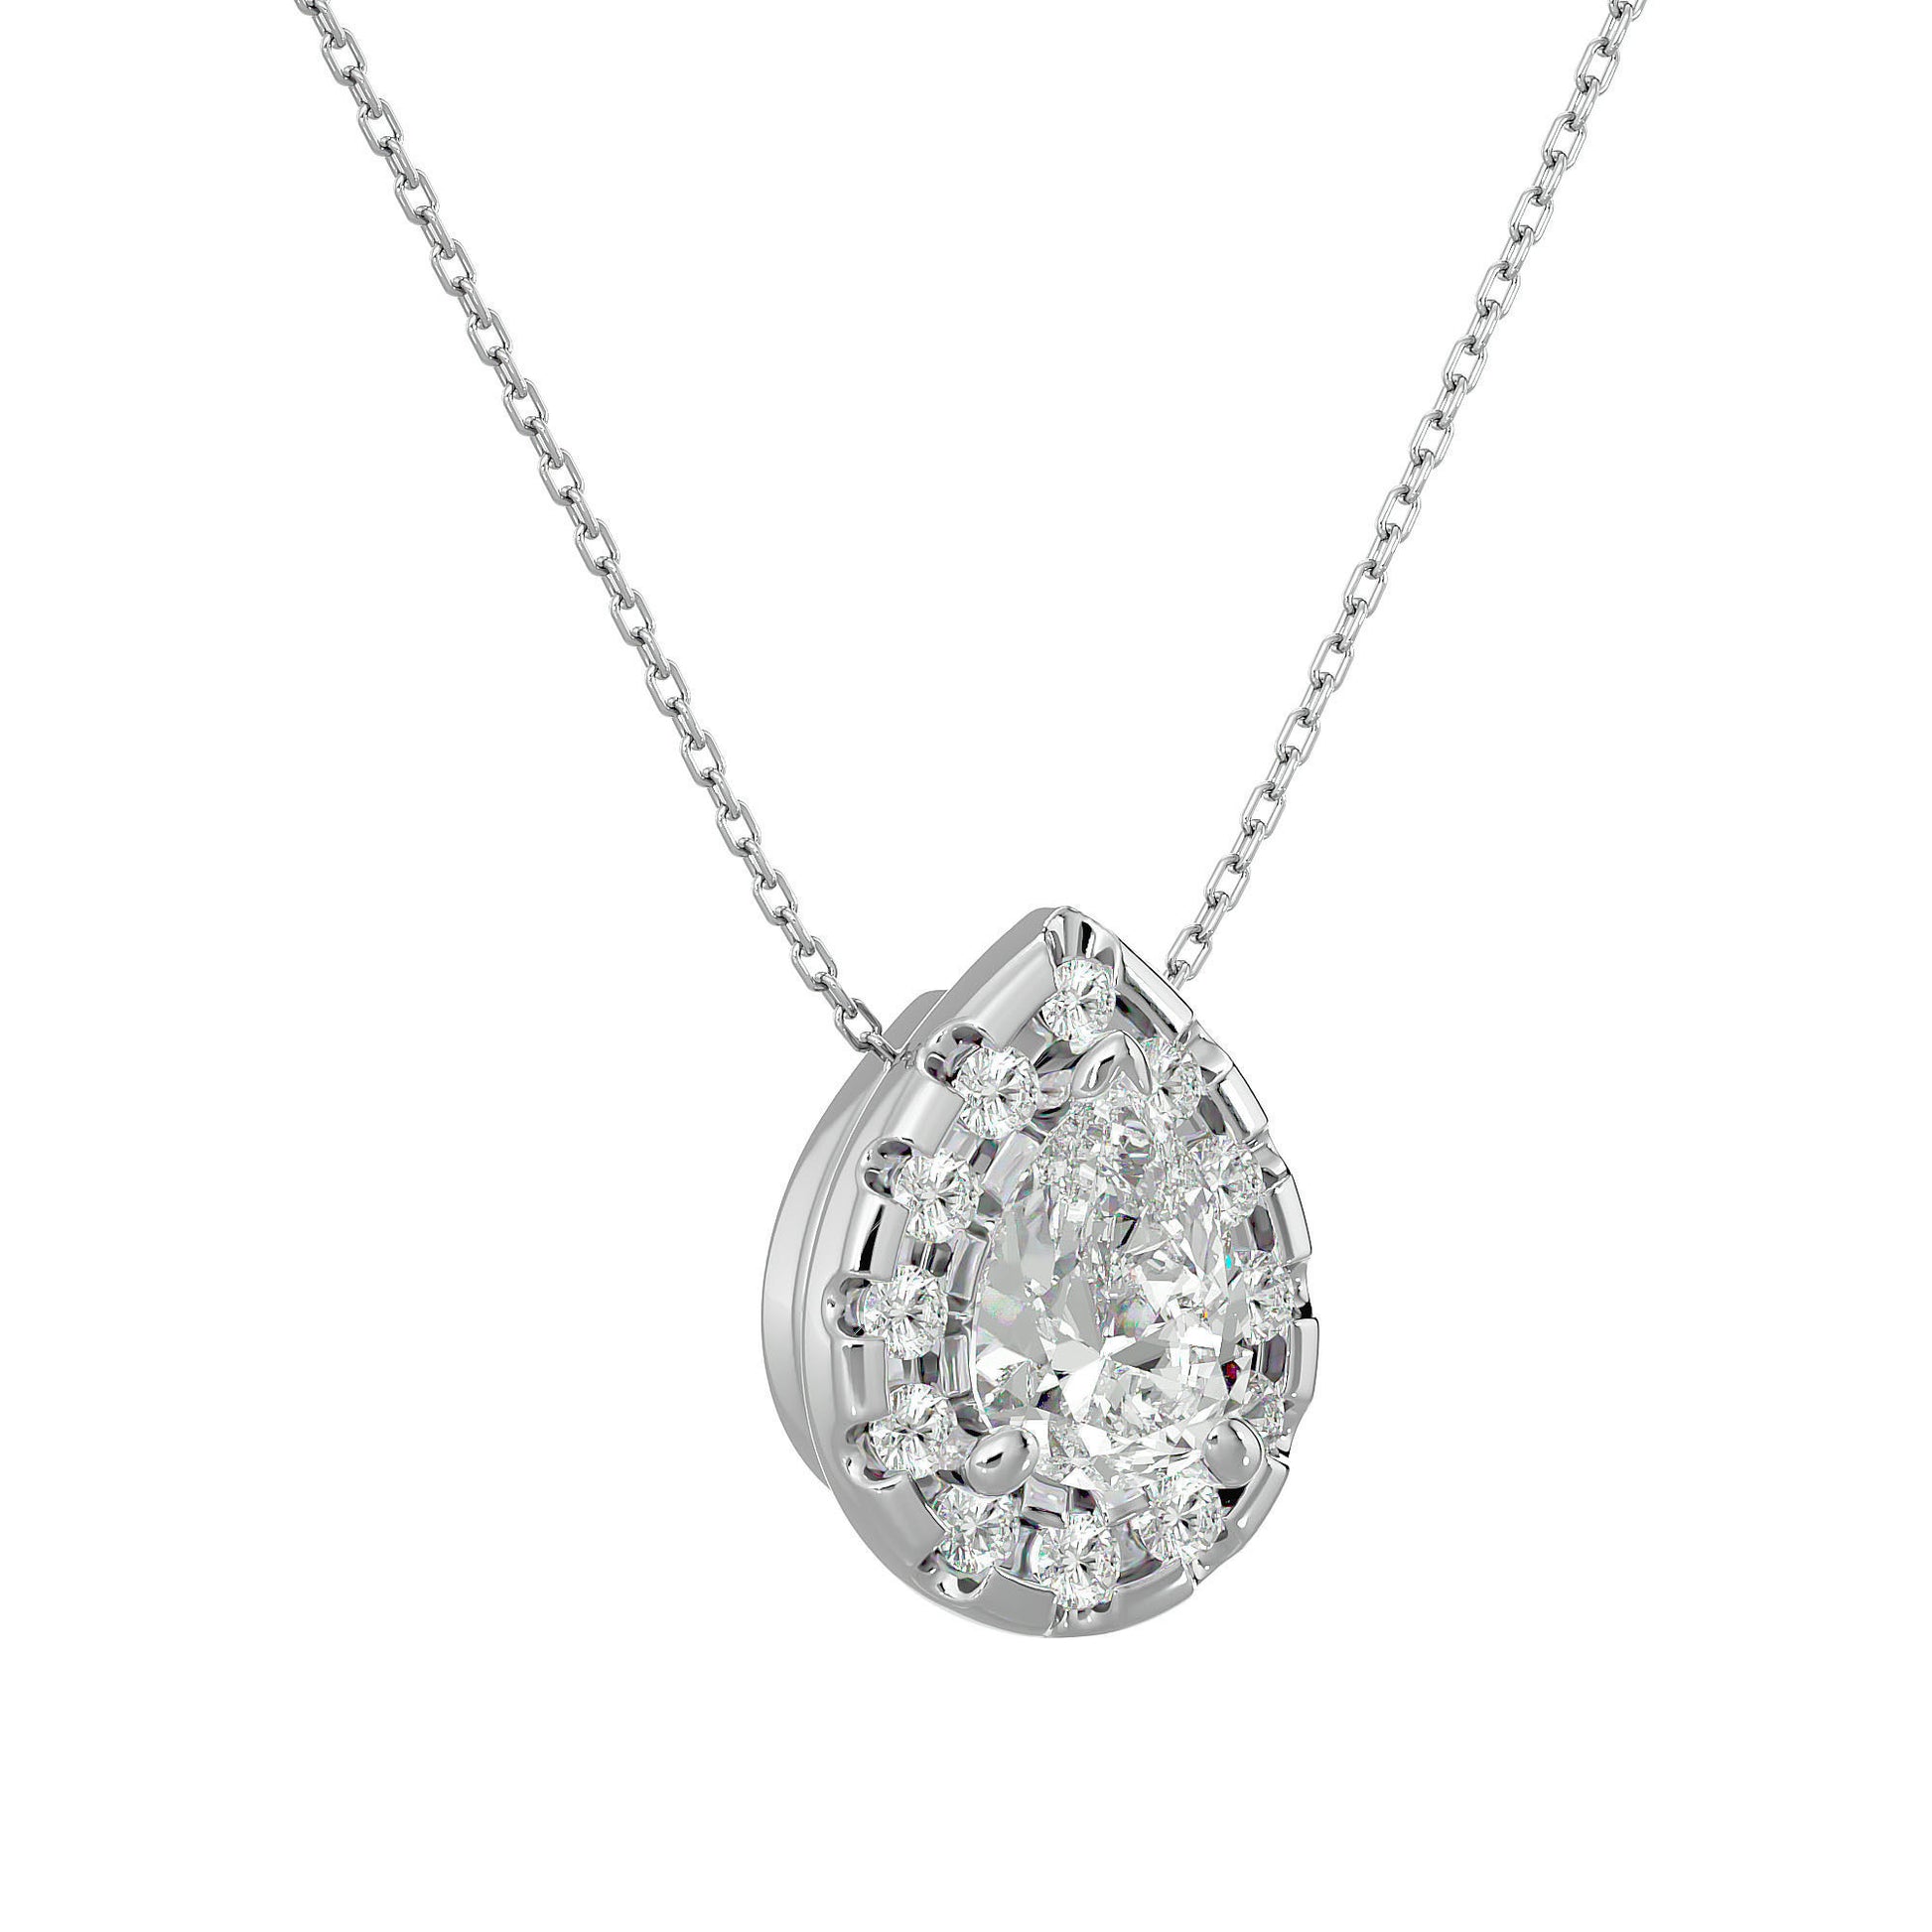 Solitaire necklace with a 6.01 carat diamond in white gold - BAUNAT